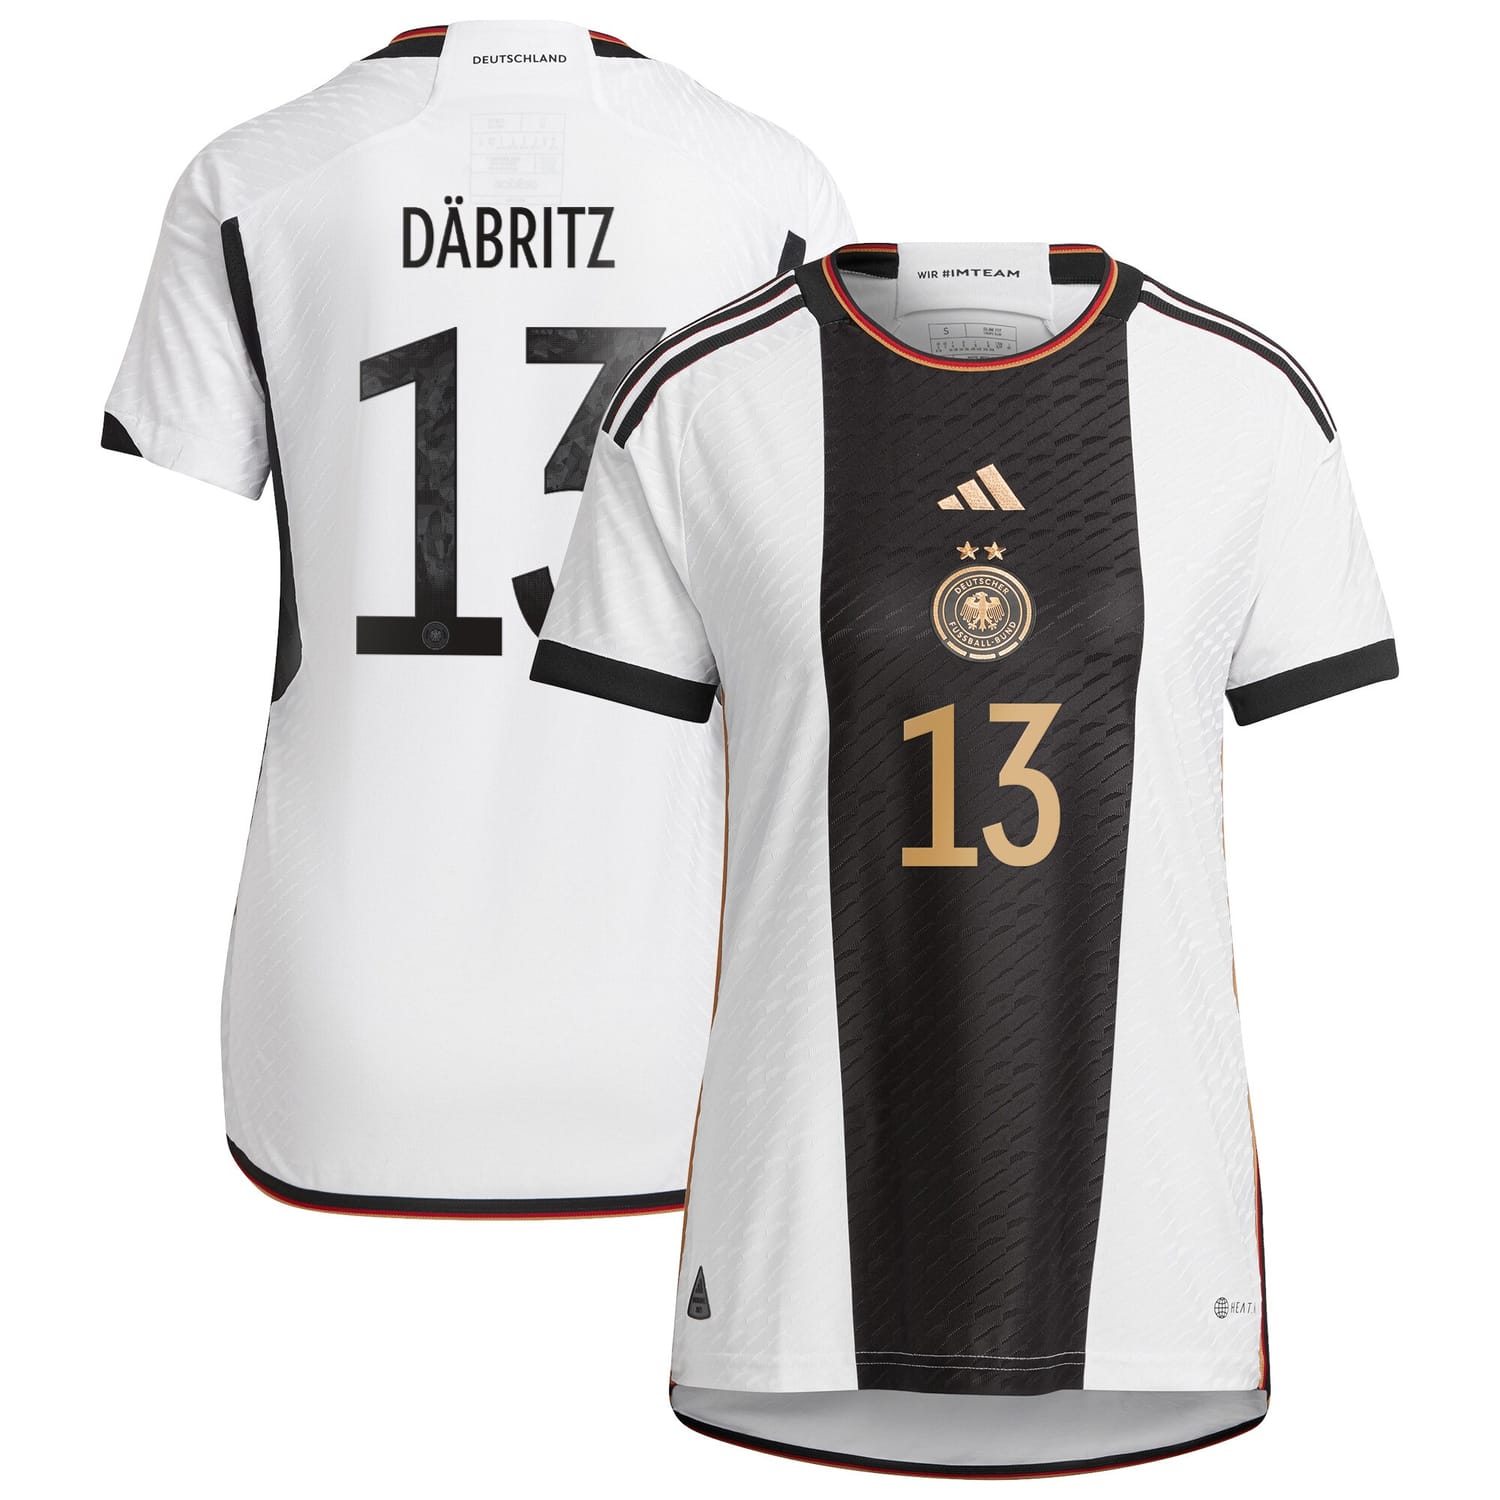 Germany National Team Home Authentic Jersey Shirt player Sara Däbritz 13 printing for Women